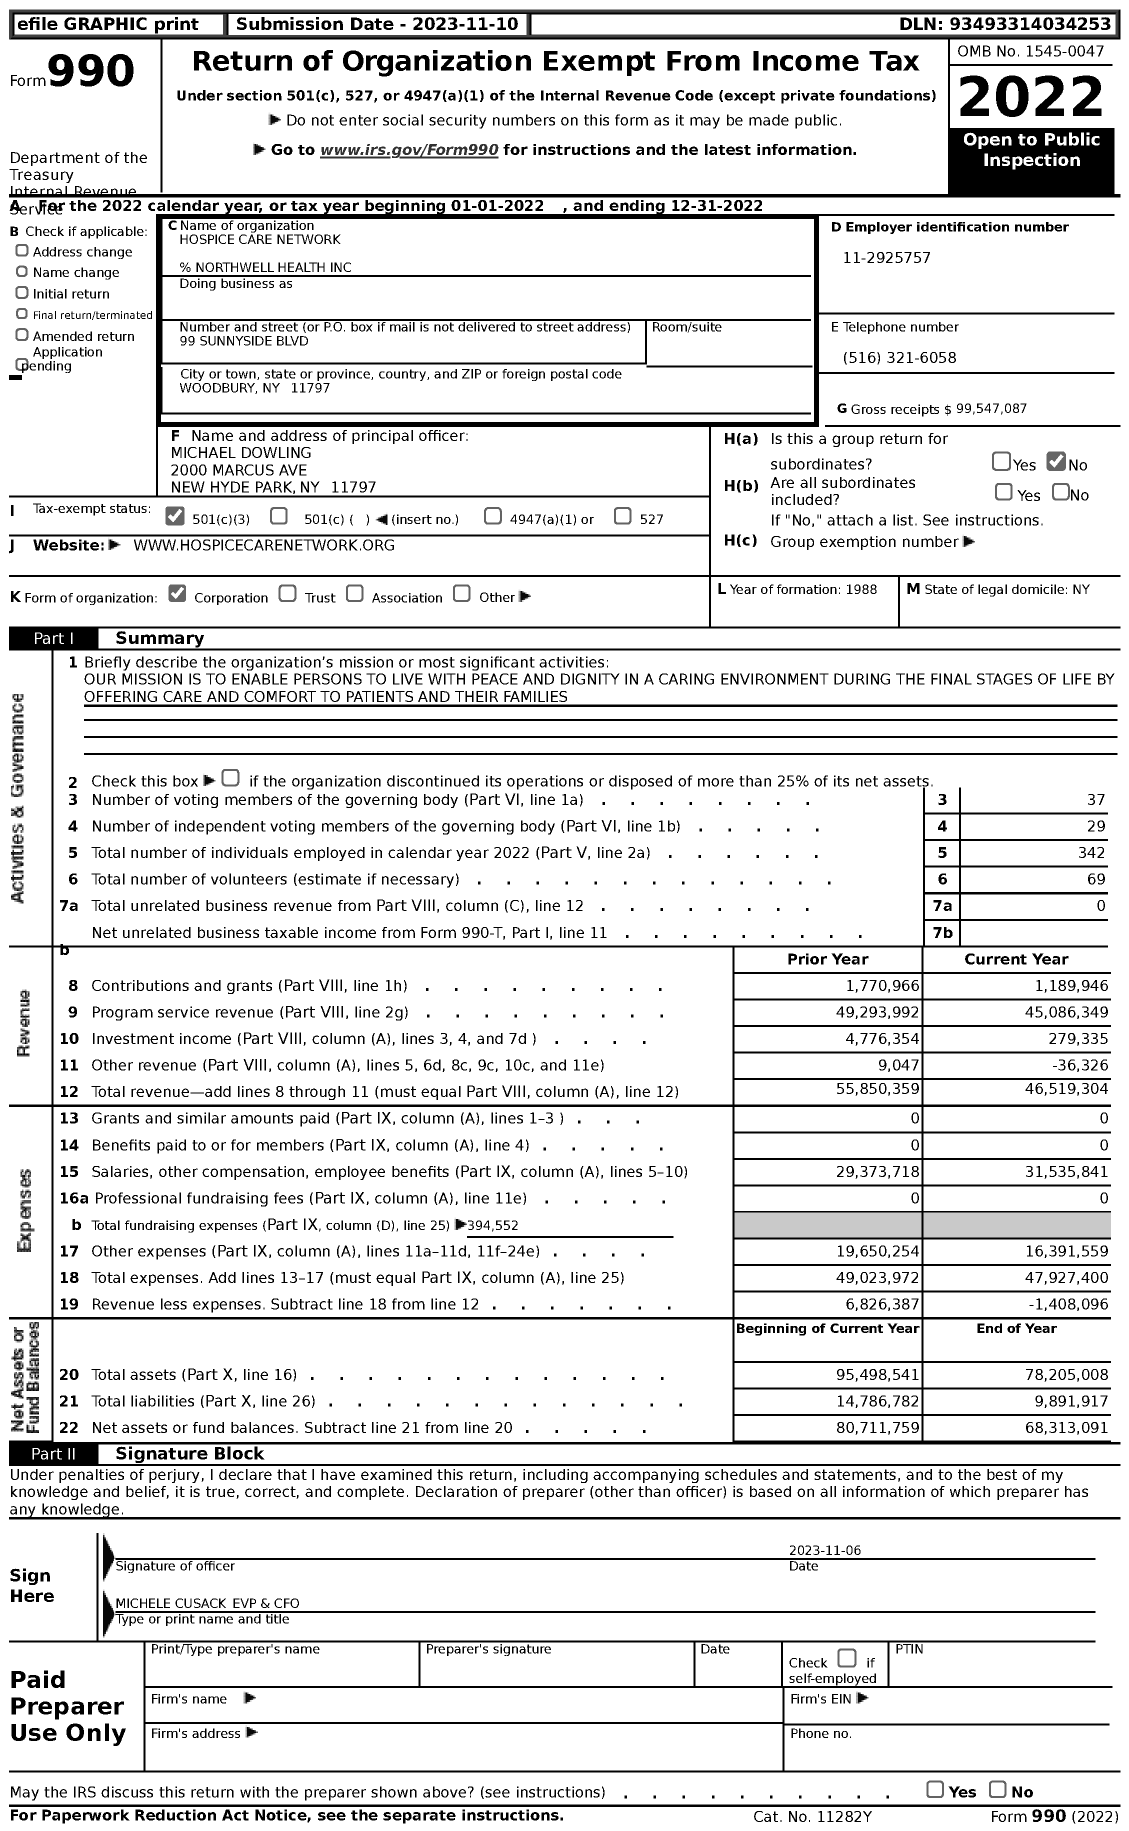 Image of first page of 2022 Form 990 for Hospice Care Network (HCN)